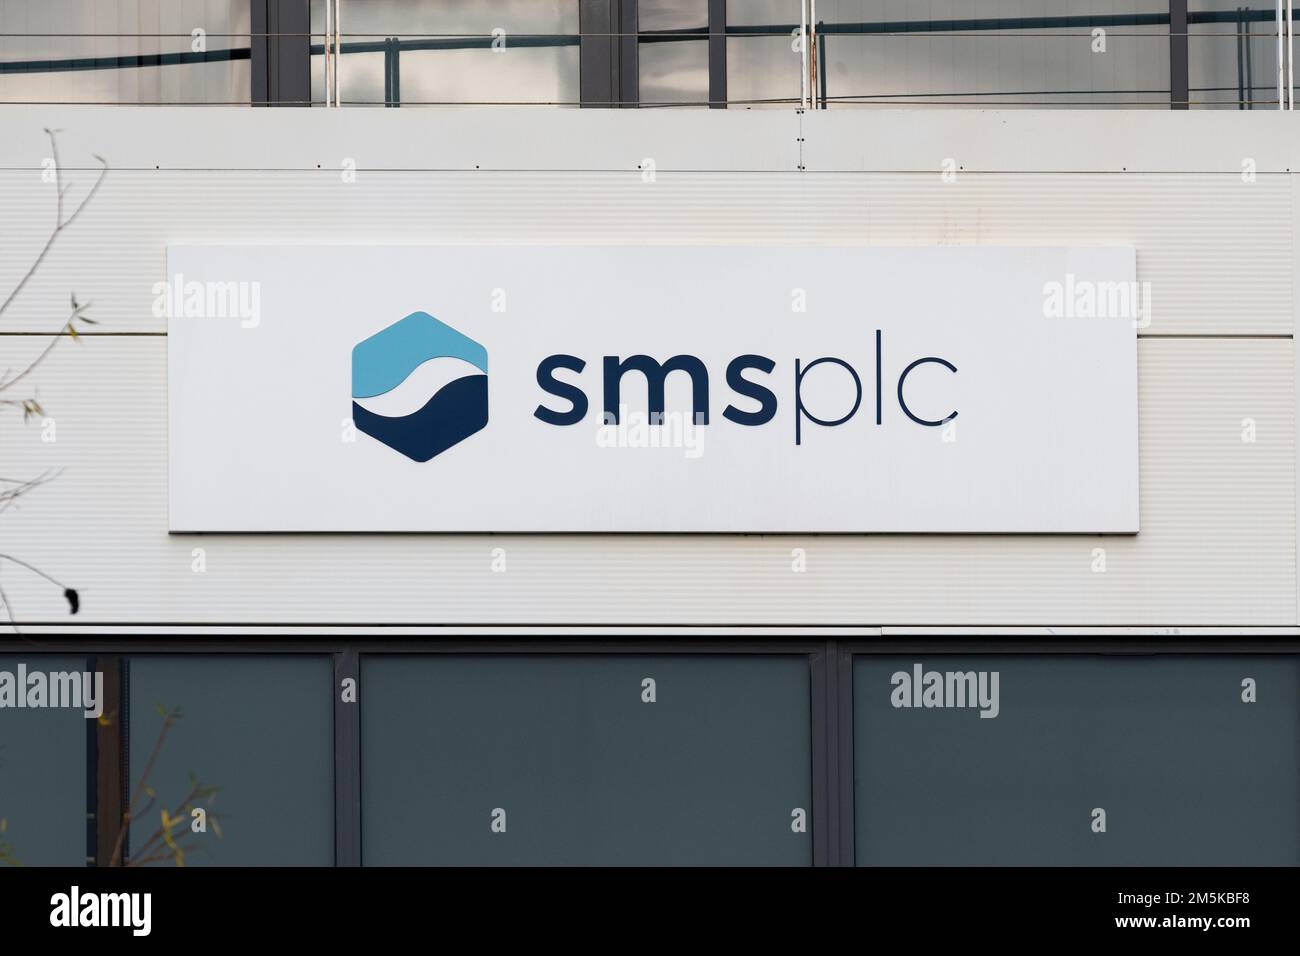 Smart Metering Systems PLC (SMS plc) sign and logo, Icon Building, First Point, Balby Carr Bank, Doncaster, South Yorkshire, England, UK Stock Photo